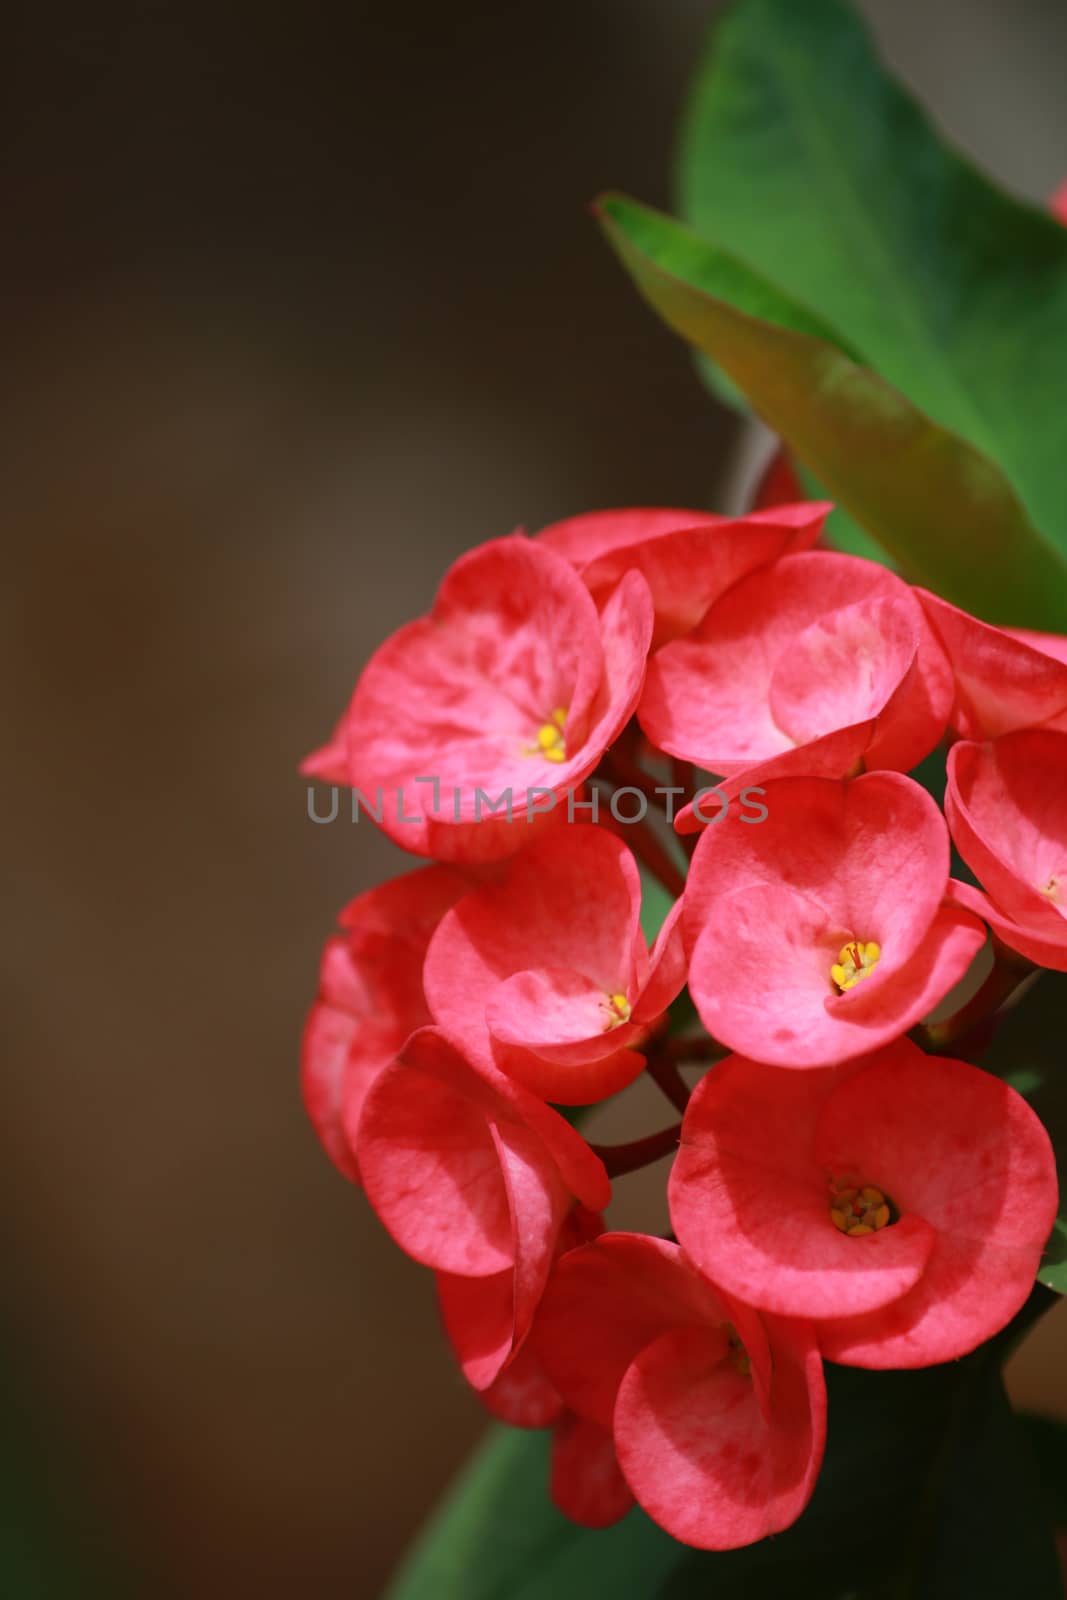 The crown of thorns or euphorbia flowers will bloom all year.